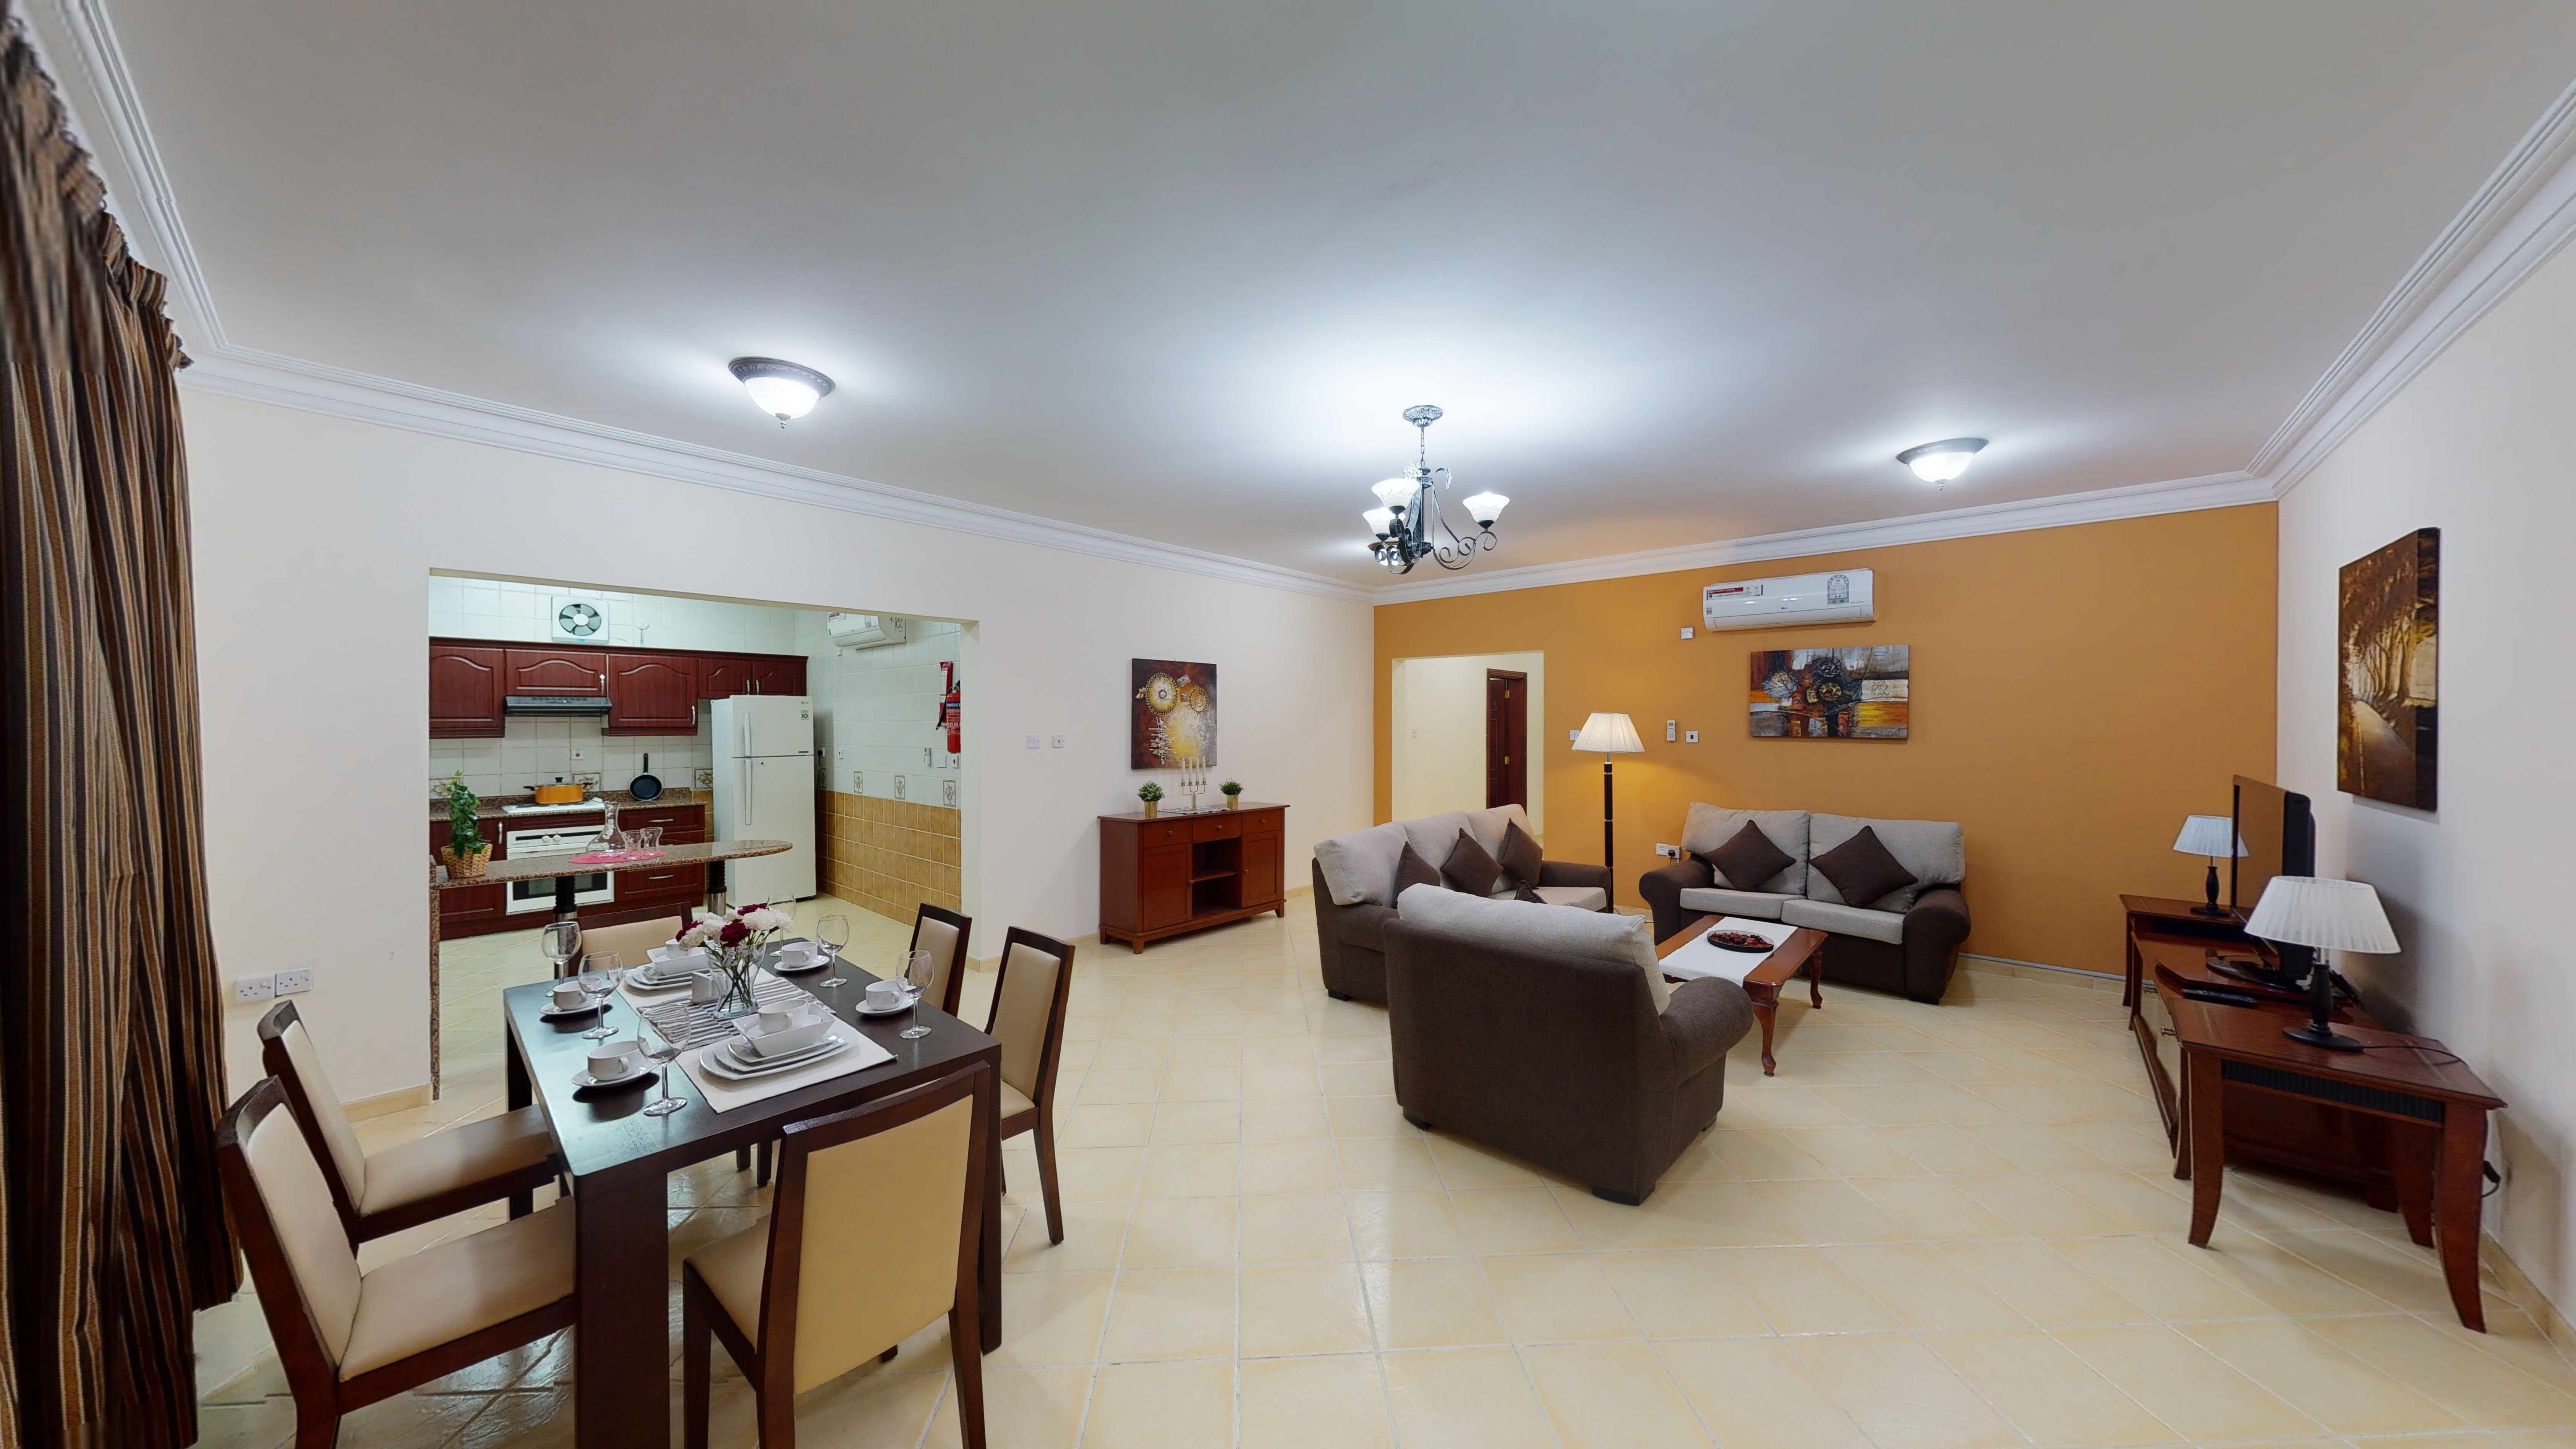 3 bedrooms furnished compound apartments in Al rawda P-56